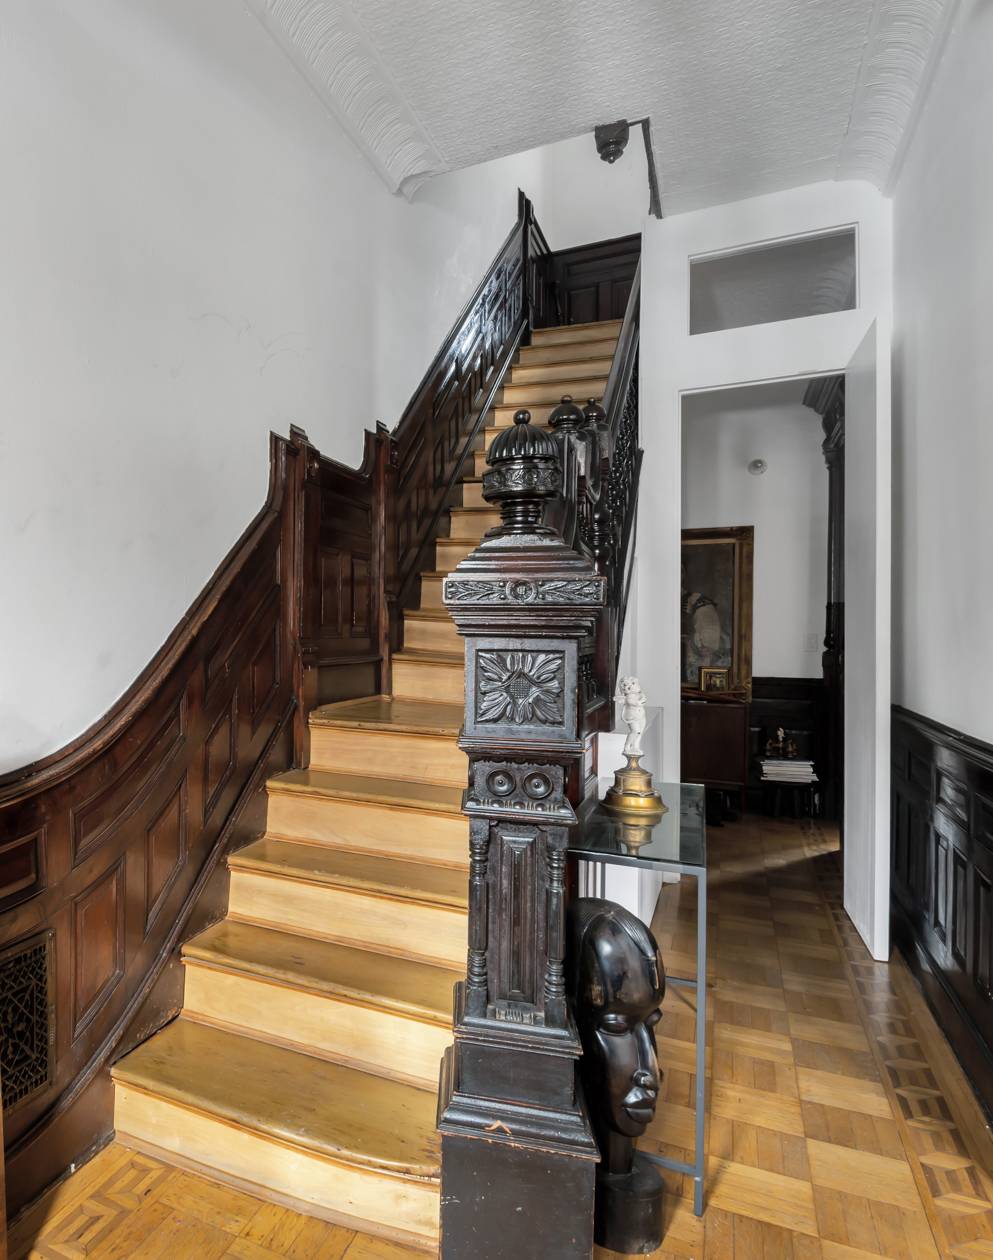 Grandeur, Grace and Glamor This exquisite 3 family brownstone, nestled in the heart of the Stuyvesant Historic District, has been preserved and restored to showcase the neoclassical, Romanesque Revival style, ...